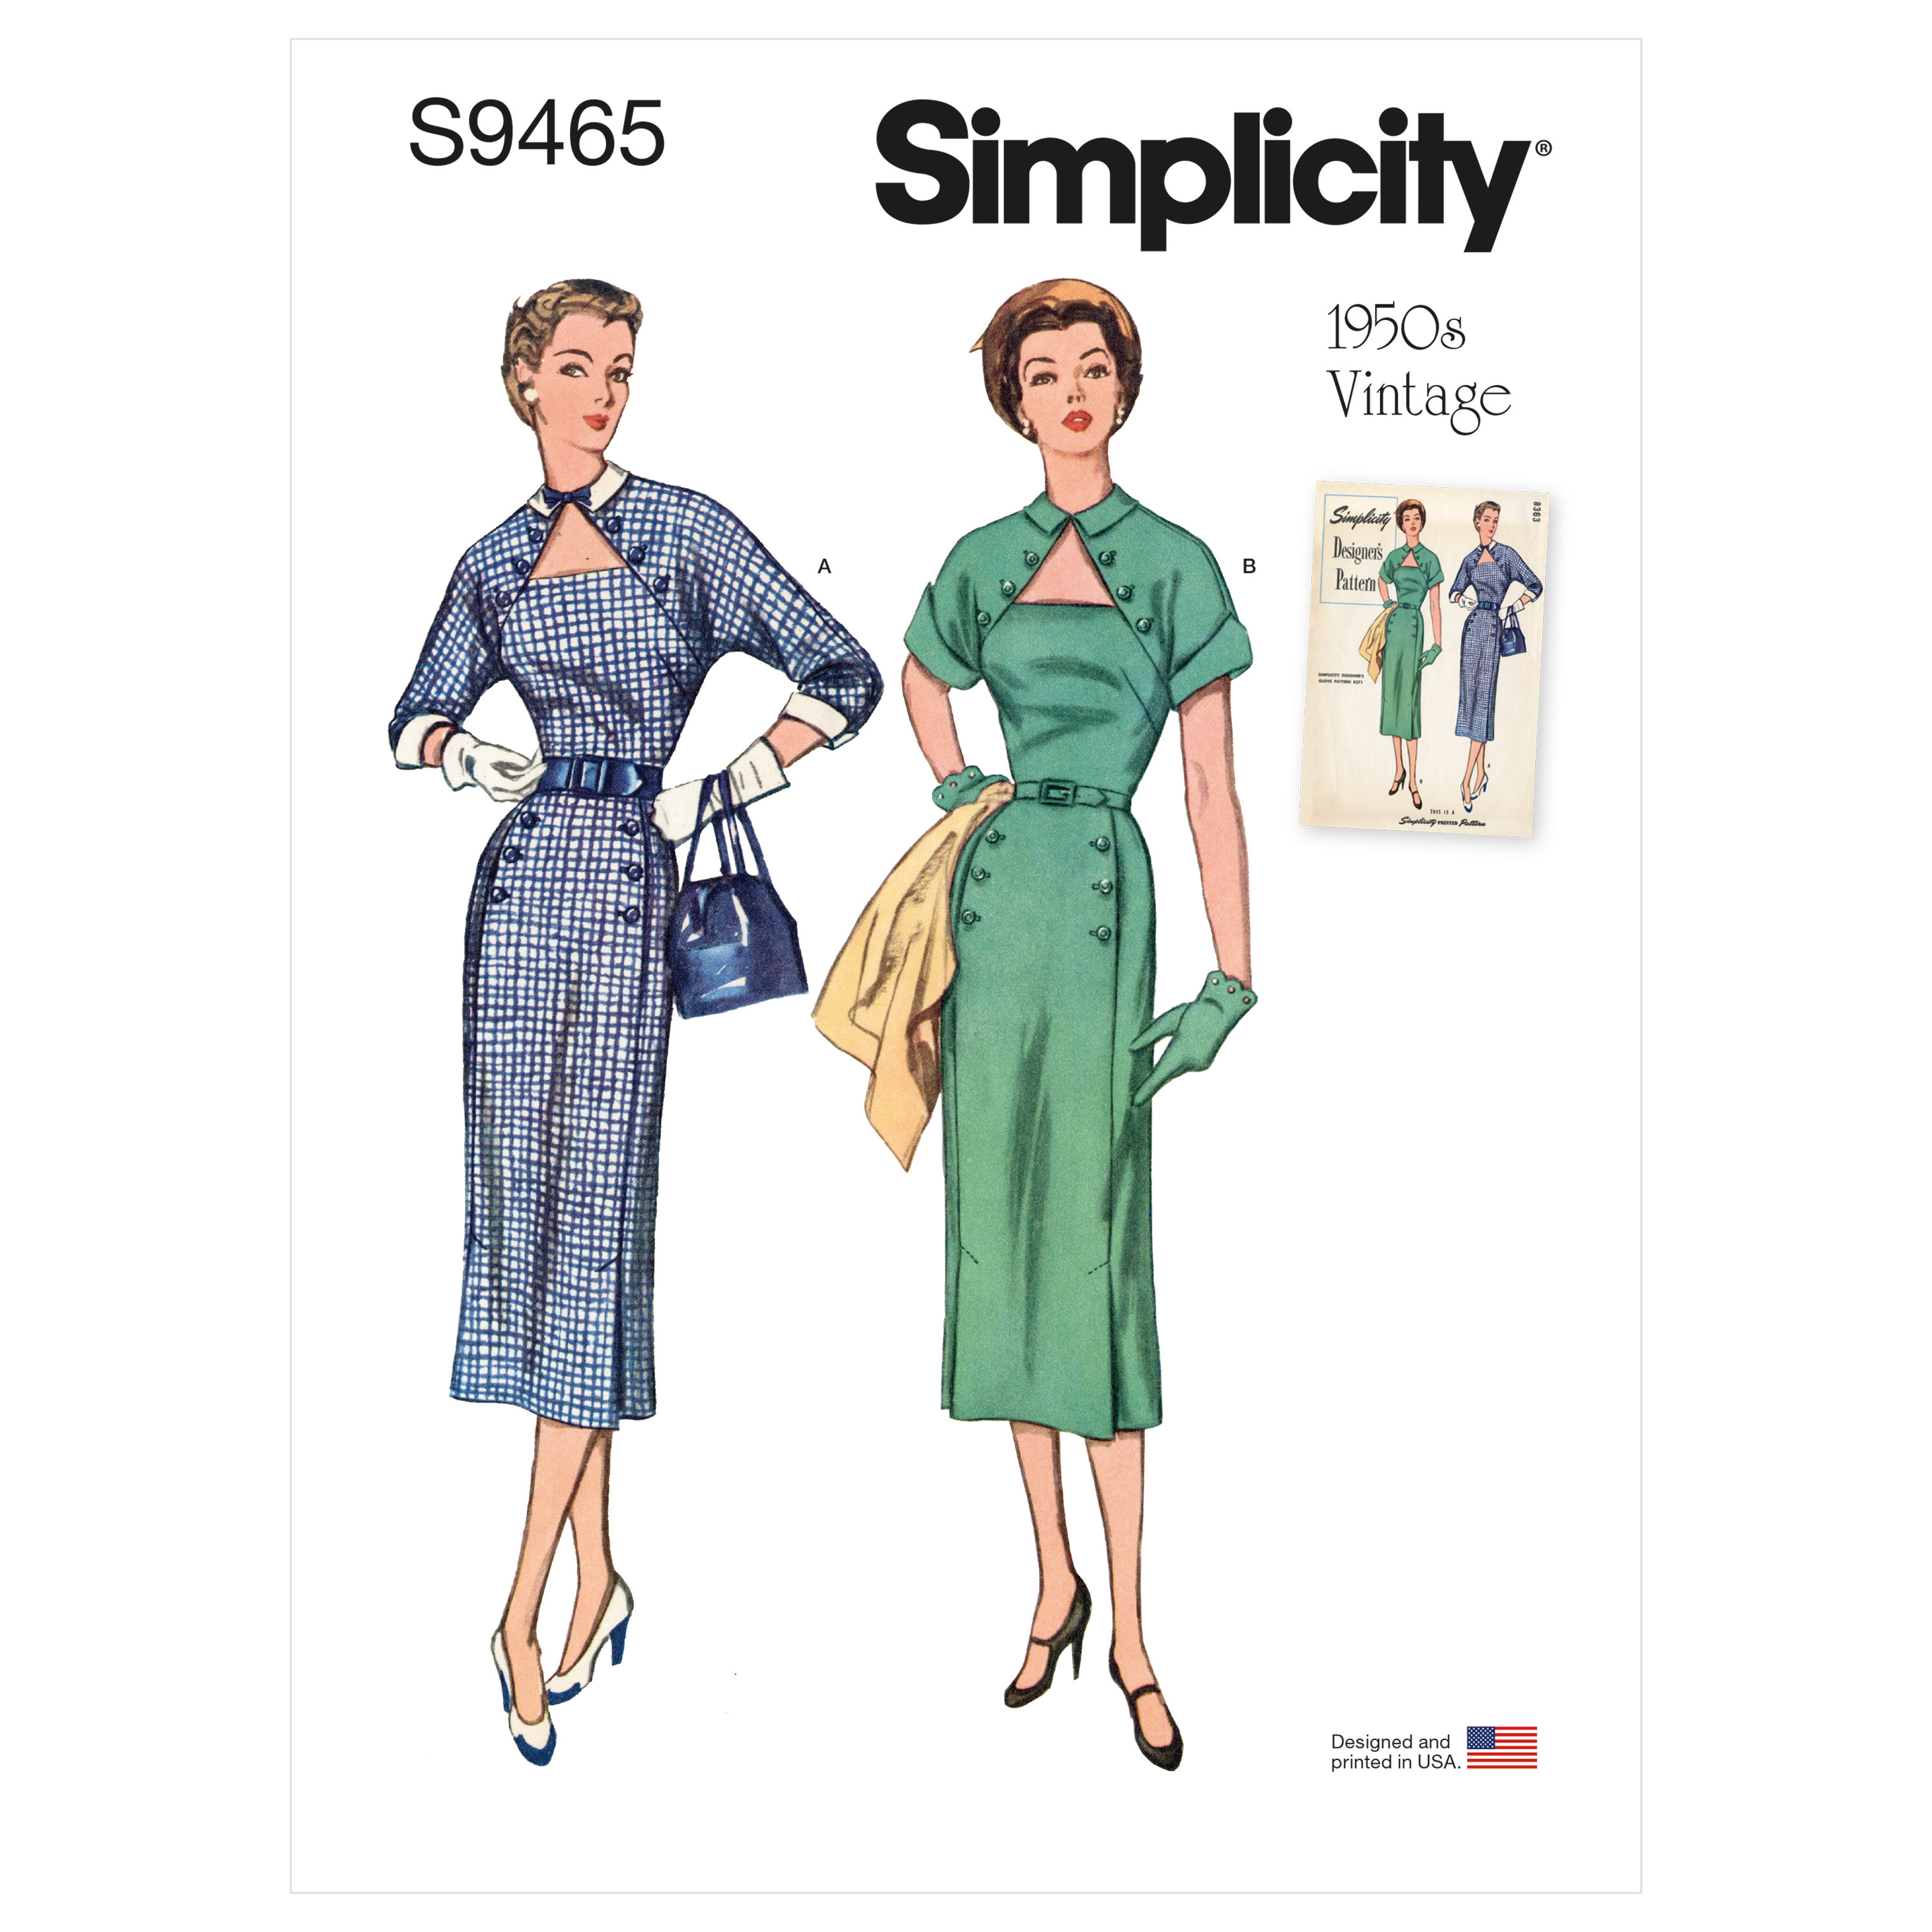 Simplicity 9325 Misses' and Women's Dress with Length and Sleeve Variations